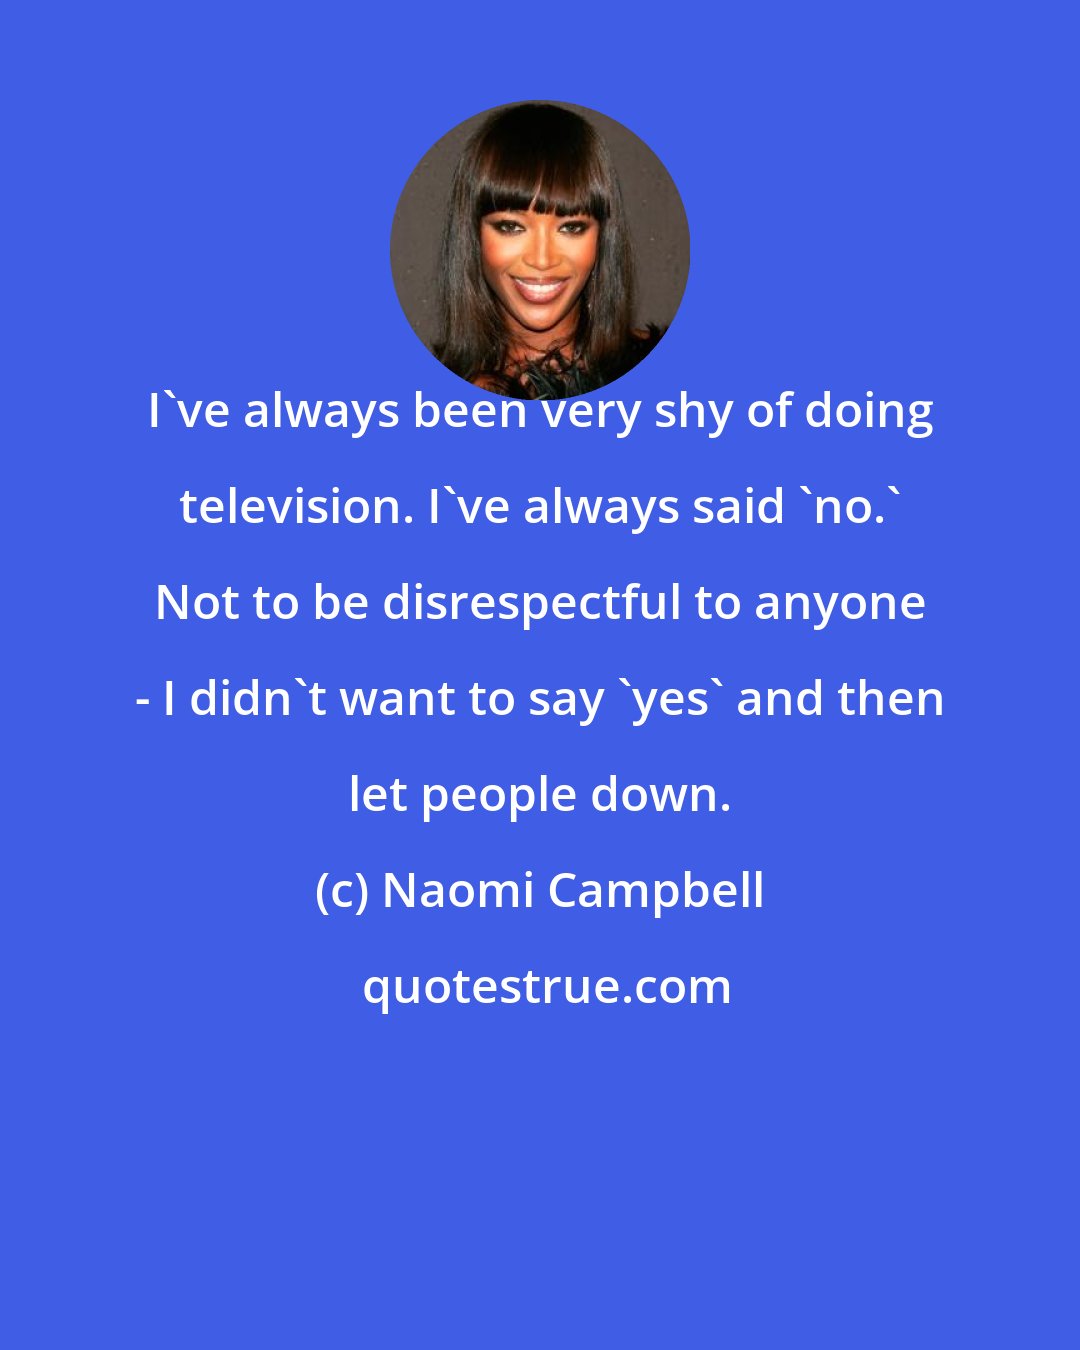 Naomi Campbell: I've always been very shy of doing television. I've always said 'no.' Not to be disrespectful to anyone - I didn't want to say 'yes' and then let people down.